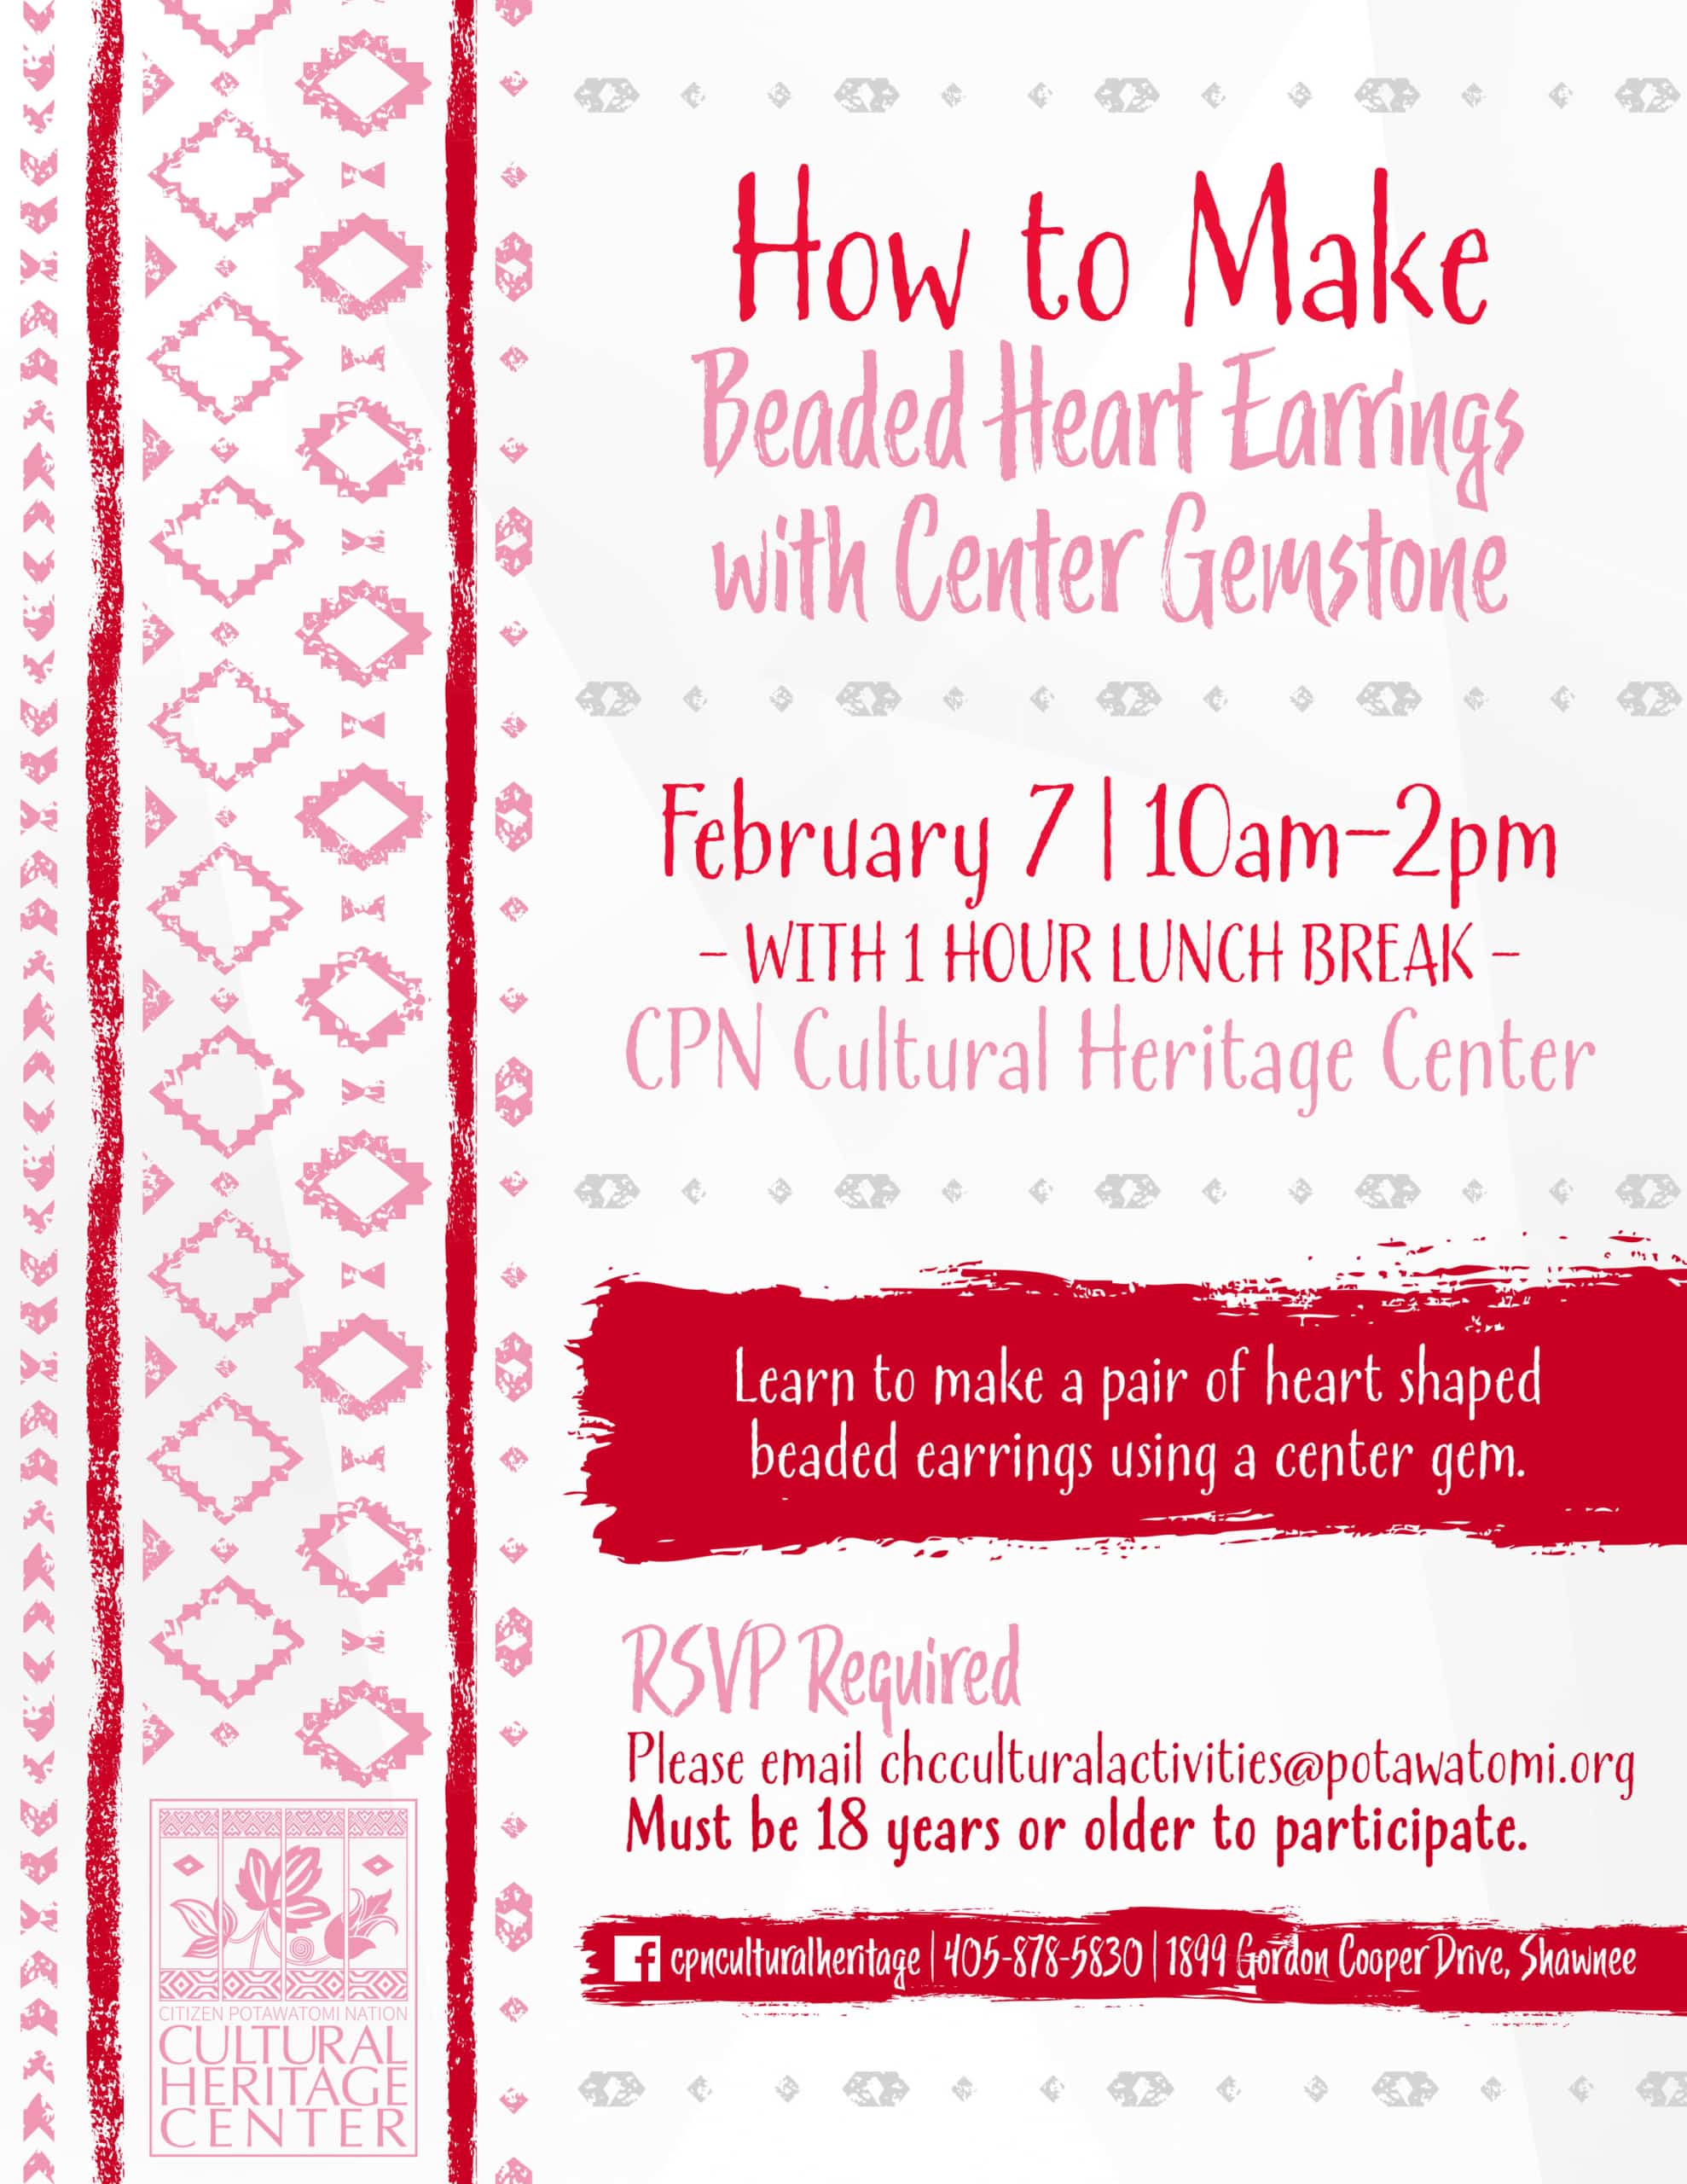 Red and pink geometric designs frame an invitation to join Cultural Activities Coordinator Leslie Deer for a class on how to make beaded heart earrings with center gemstone on Tuesday, February 7, 2023, from 10 a.m. to 2 p.m. at the Cultural Heritage Center. There will be a one-hour lunch break. RSVP is required. Please email chcculturalactivities@potawatomi.org. Participants must be 18 years or older.